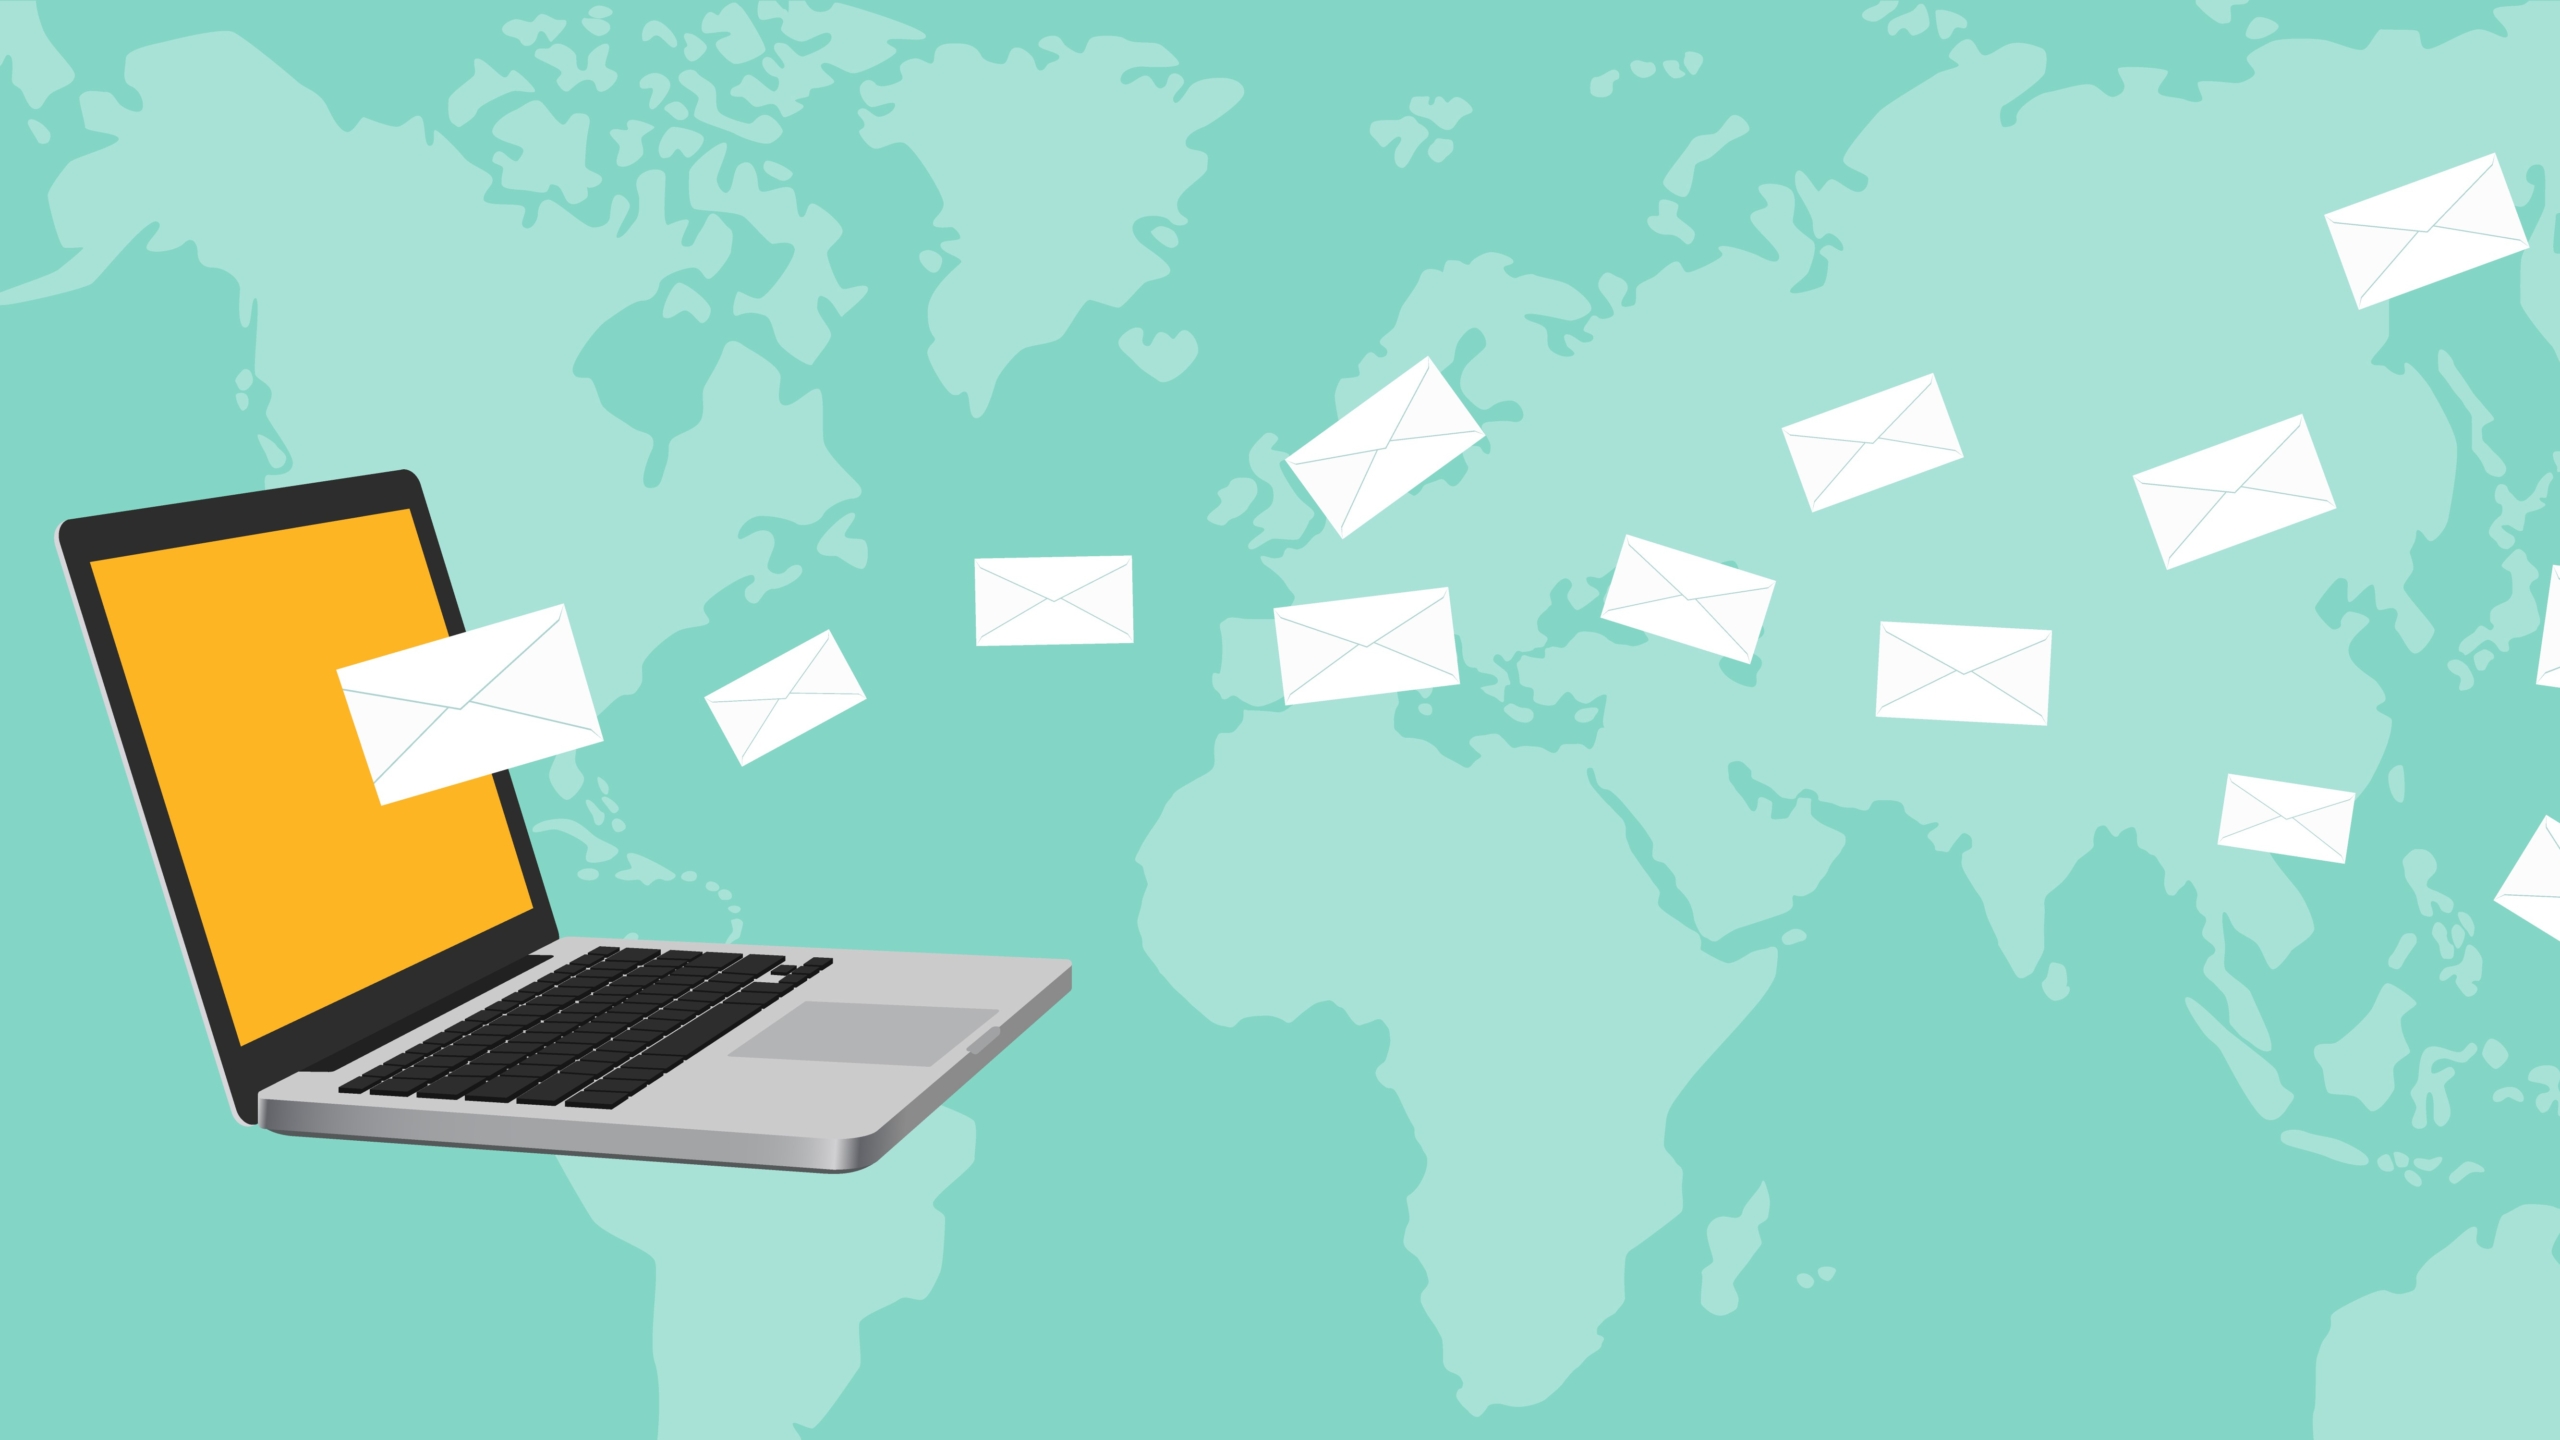 newsletter concept illustration with notebook laptop and mail flying spreading around the world with map as background